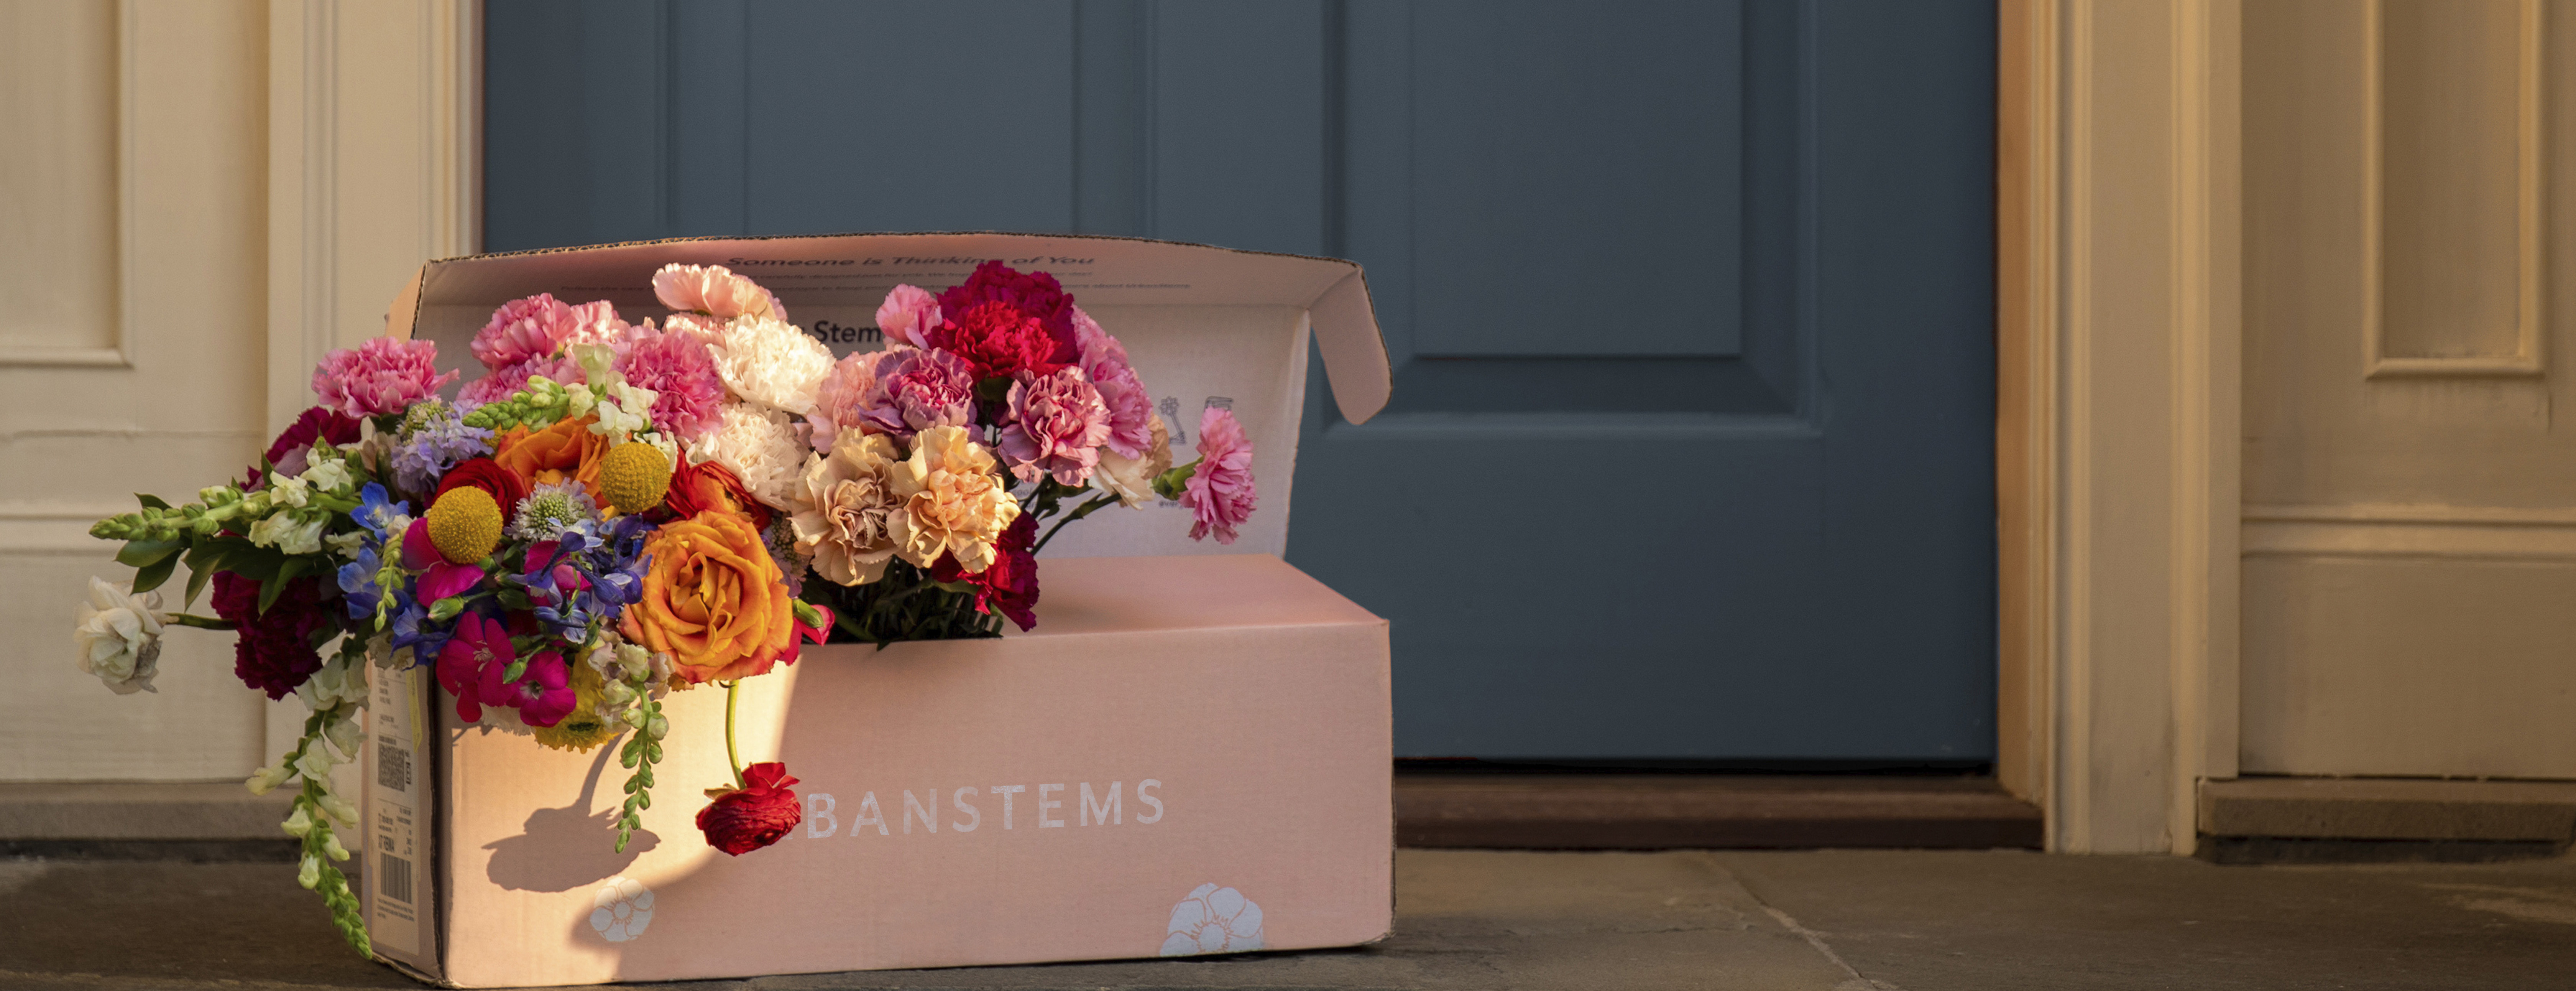 Several floral bouquets in a light pink same-day delivery box on a doorstep